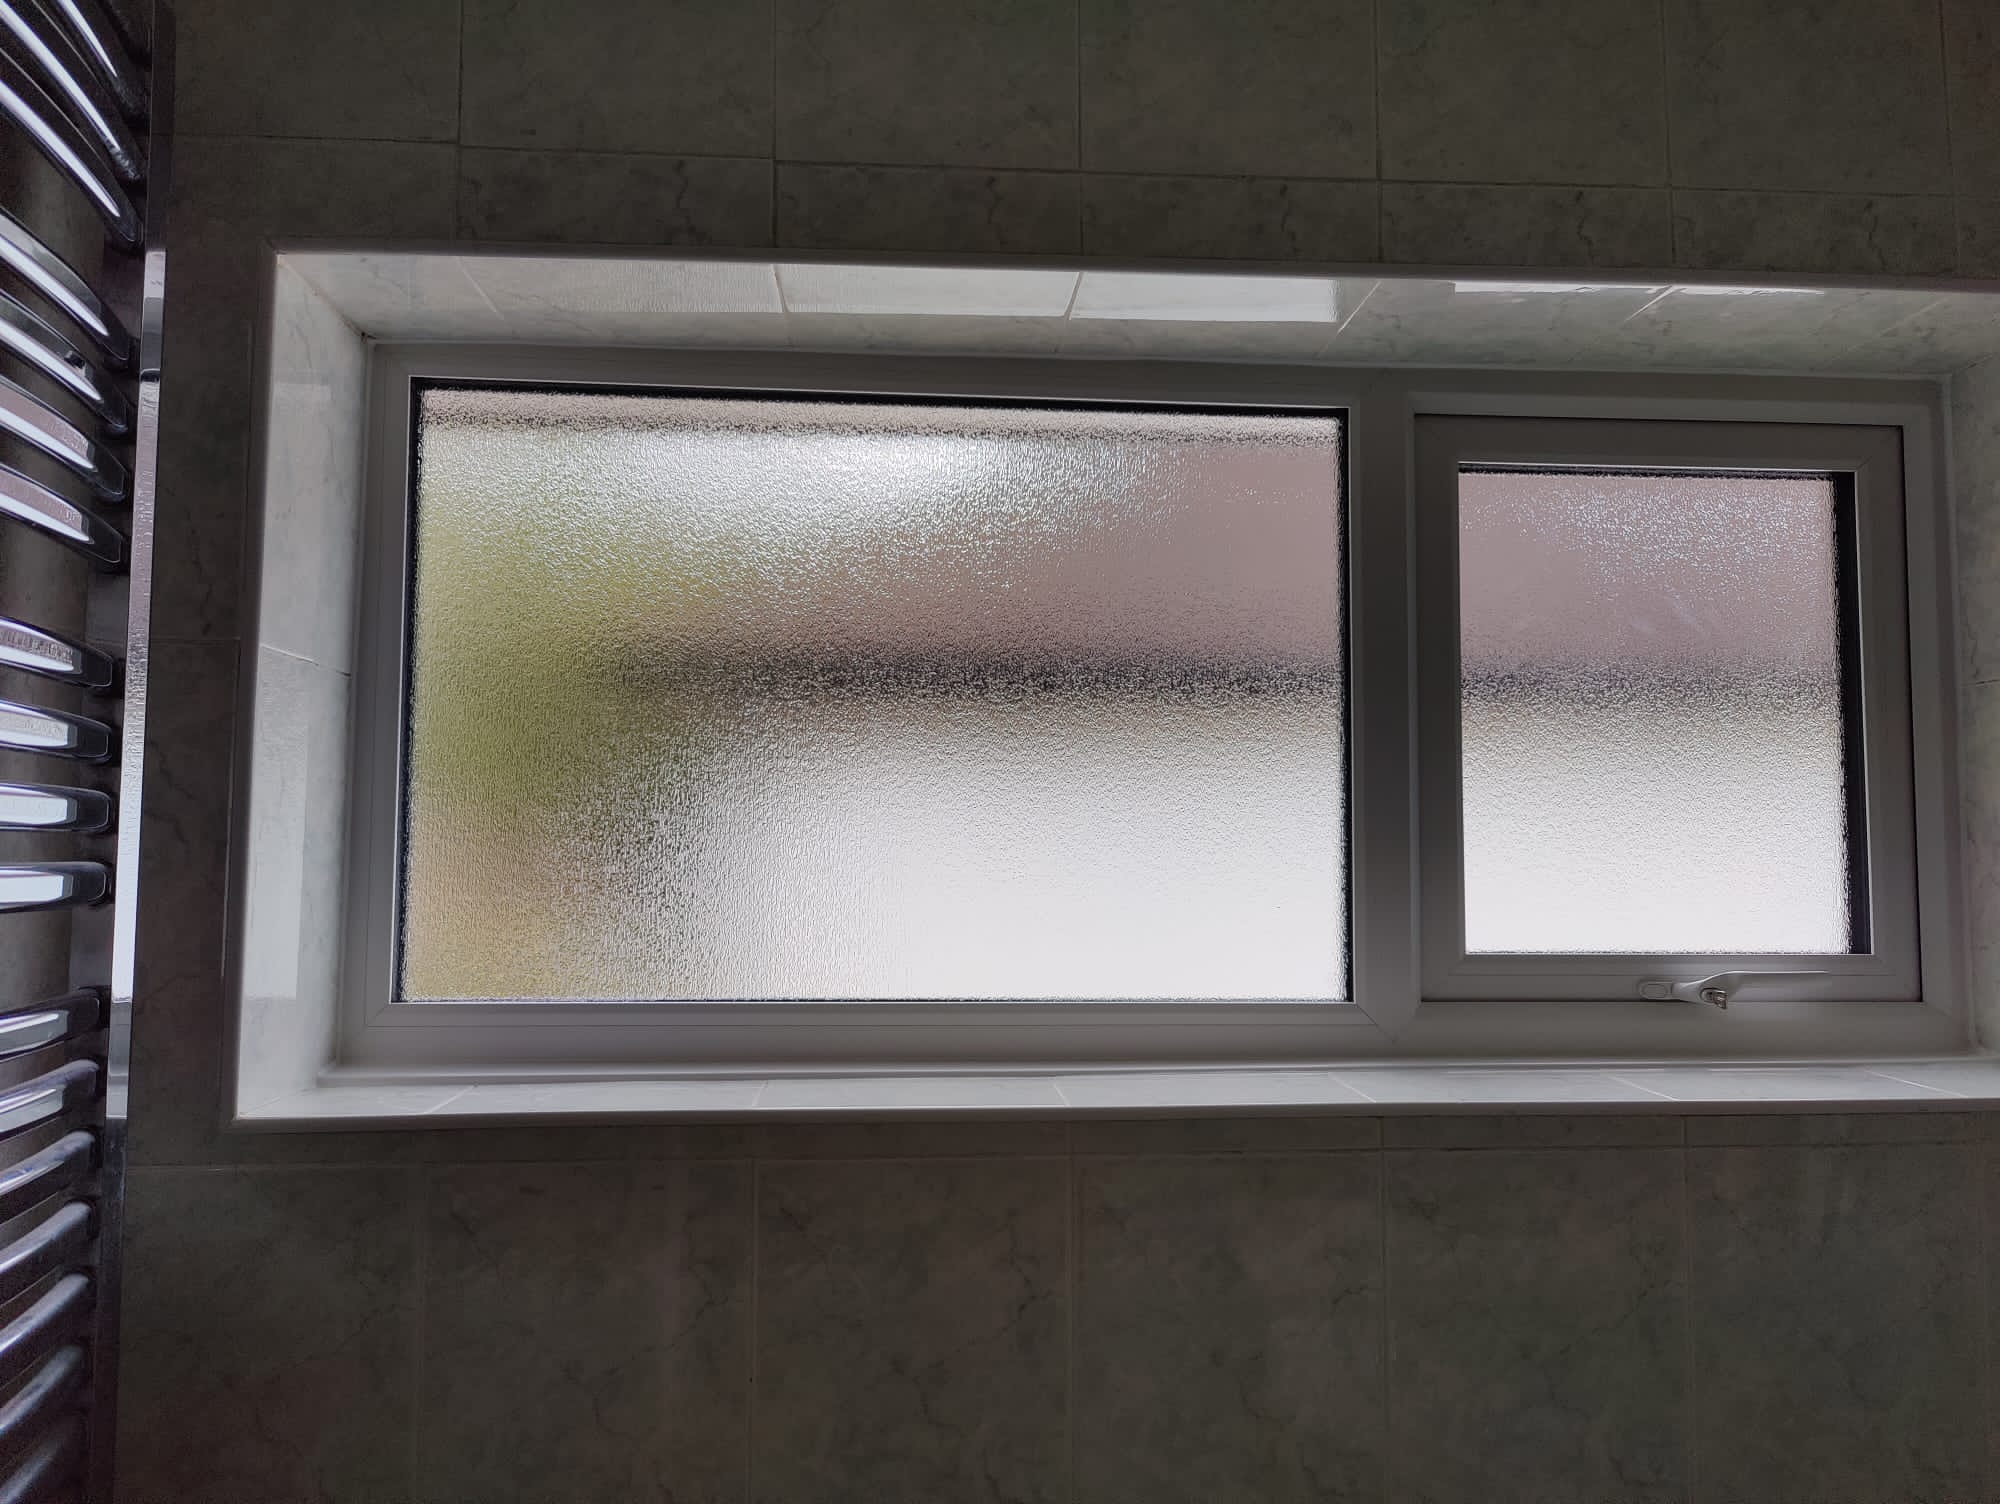 The Chislehurst Installation In System 10 Chamfered Bevelled UPVC With Lead, Openers And Fixed Panes